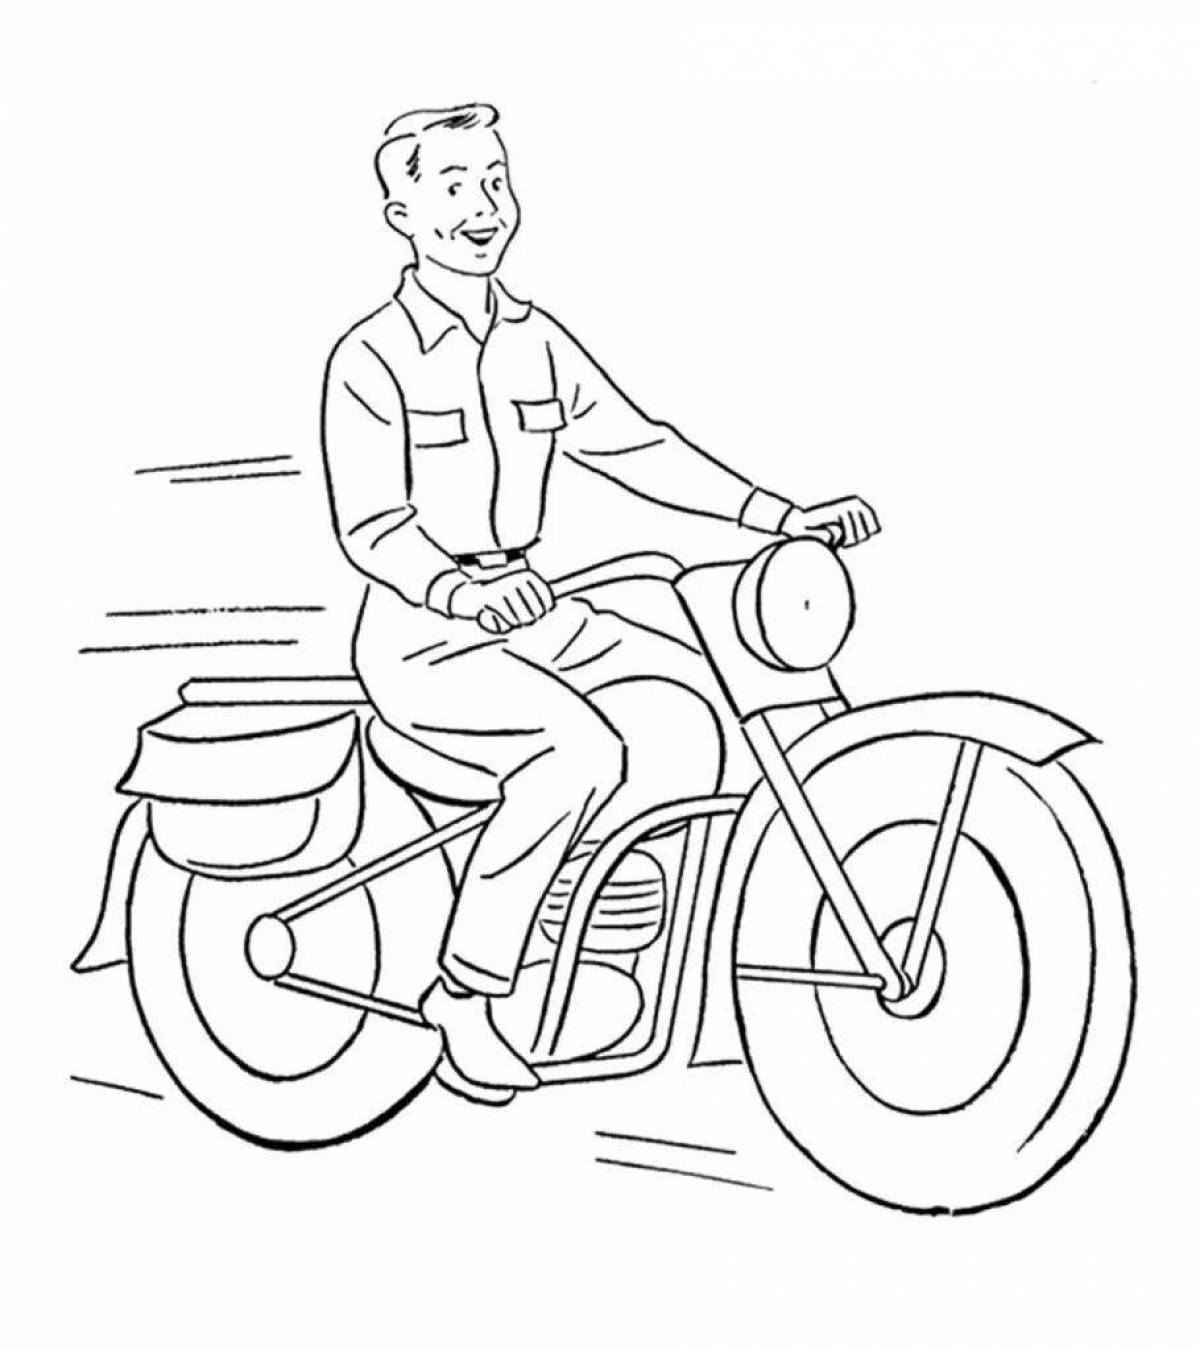 Monumental military motorcycle coloring page